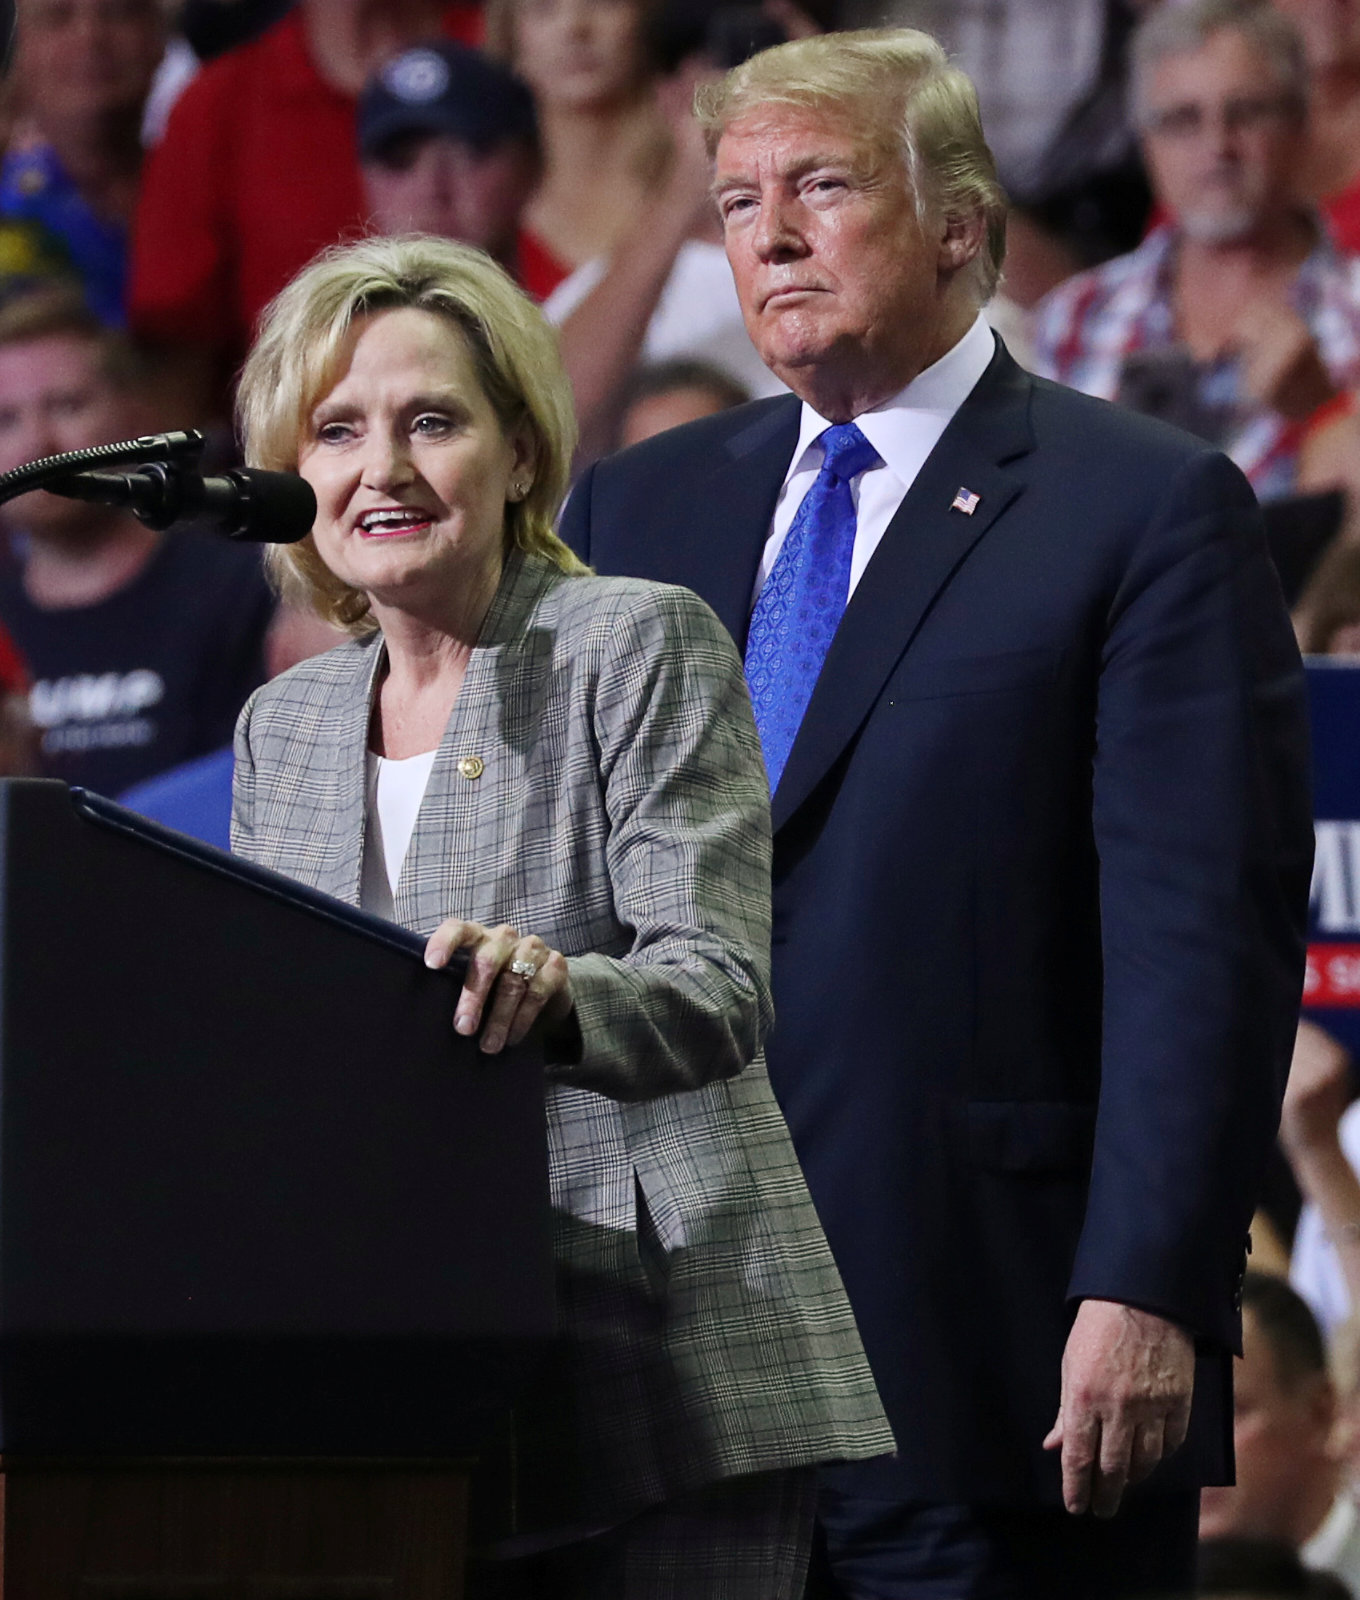 PHOTO: Senator Cindy Hyde-Smith joins President Donald Trump at a campaign rally in Southaven, Miss., Oct. 2, 2018.